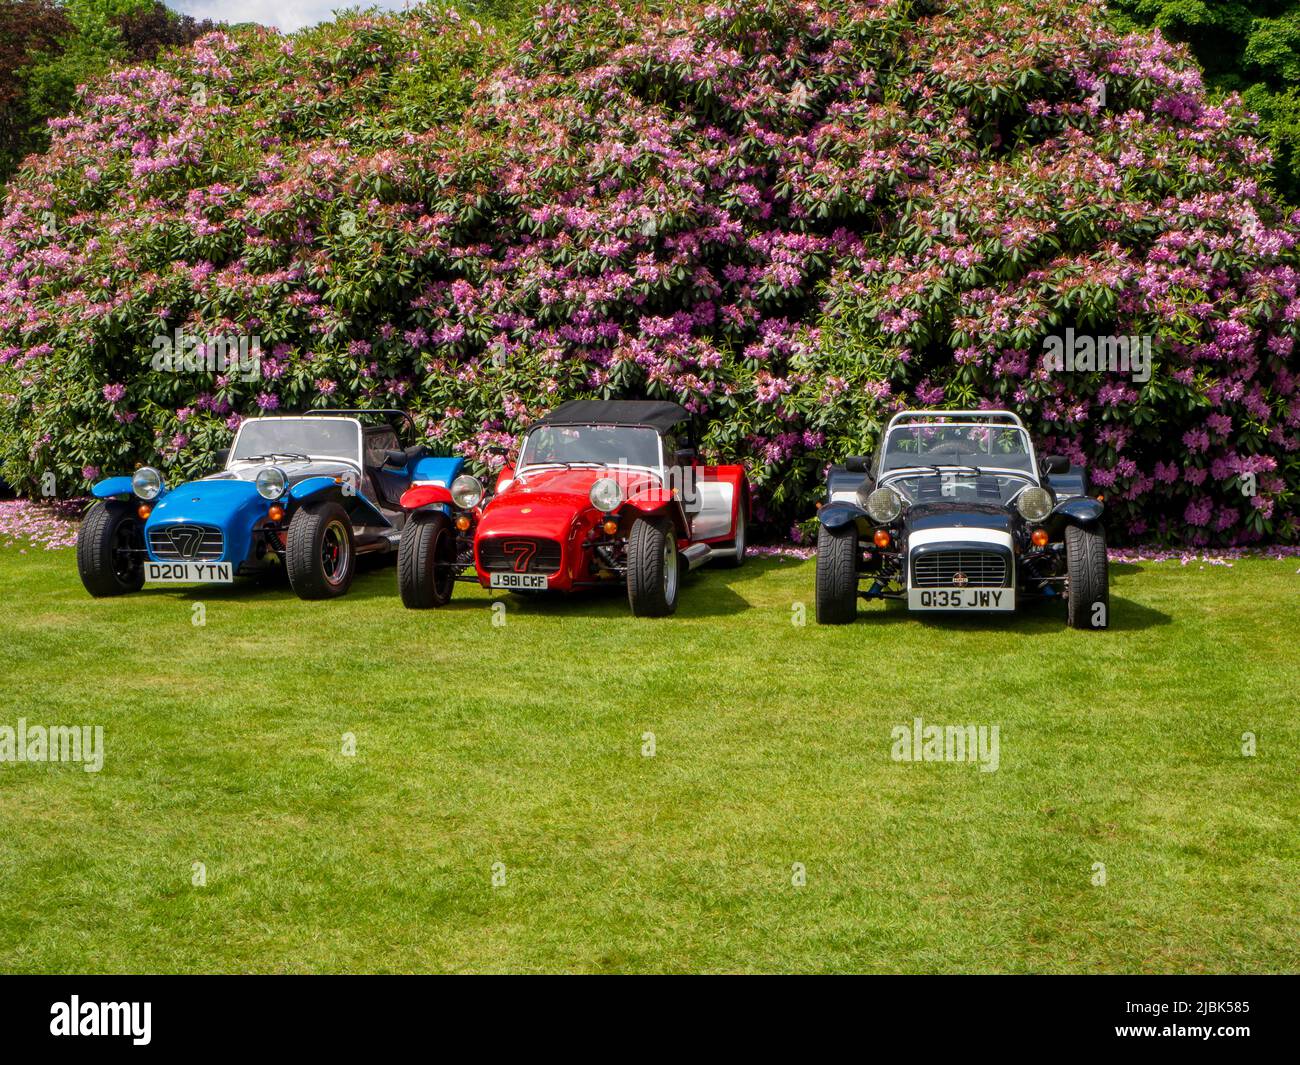 Three Caterham classic cars in front of a fully flowering Rhododendron bush Stock Photo